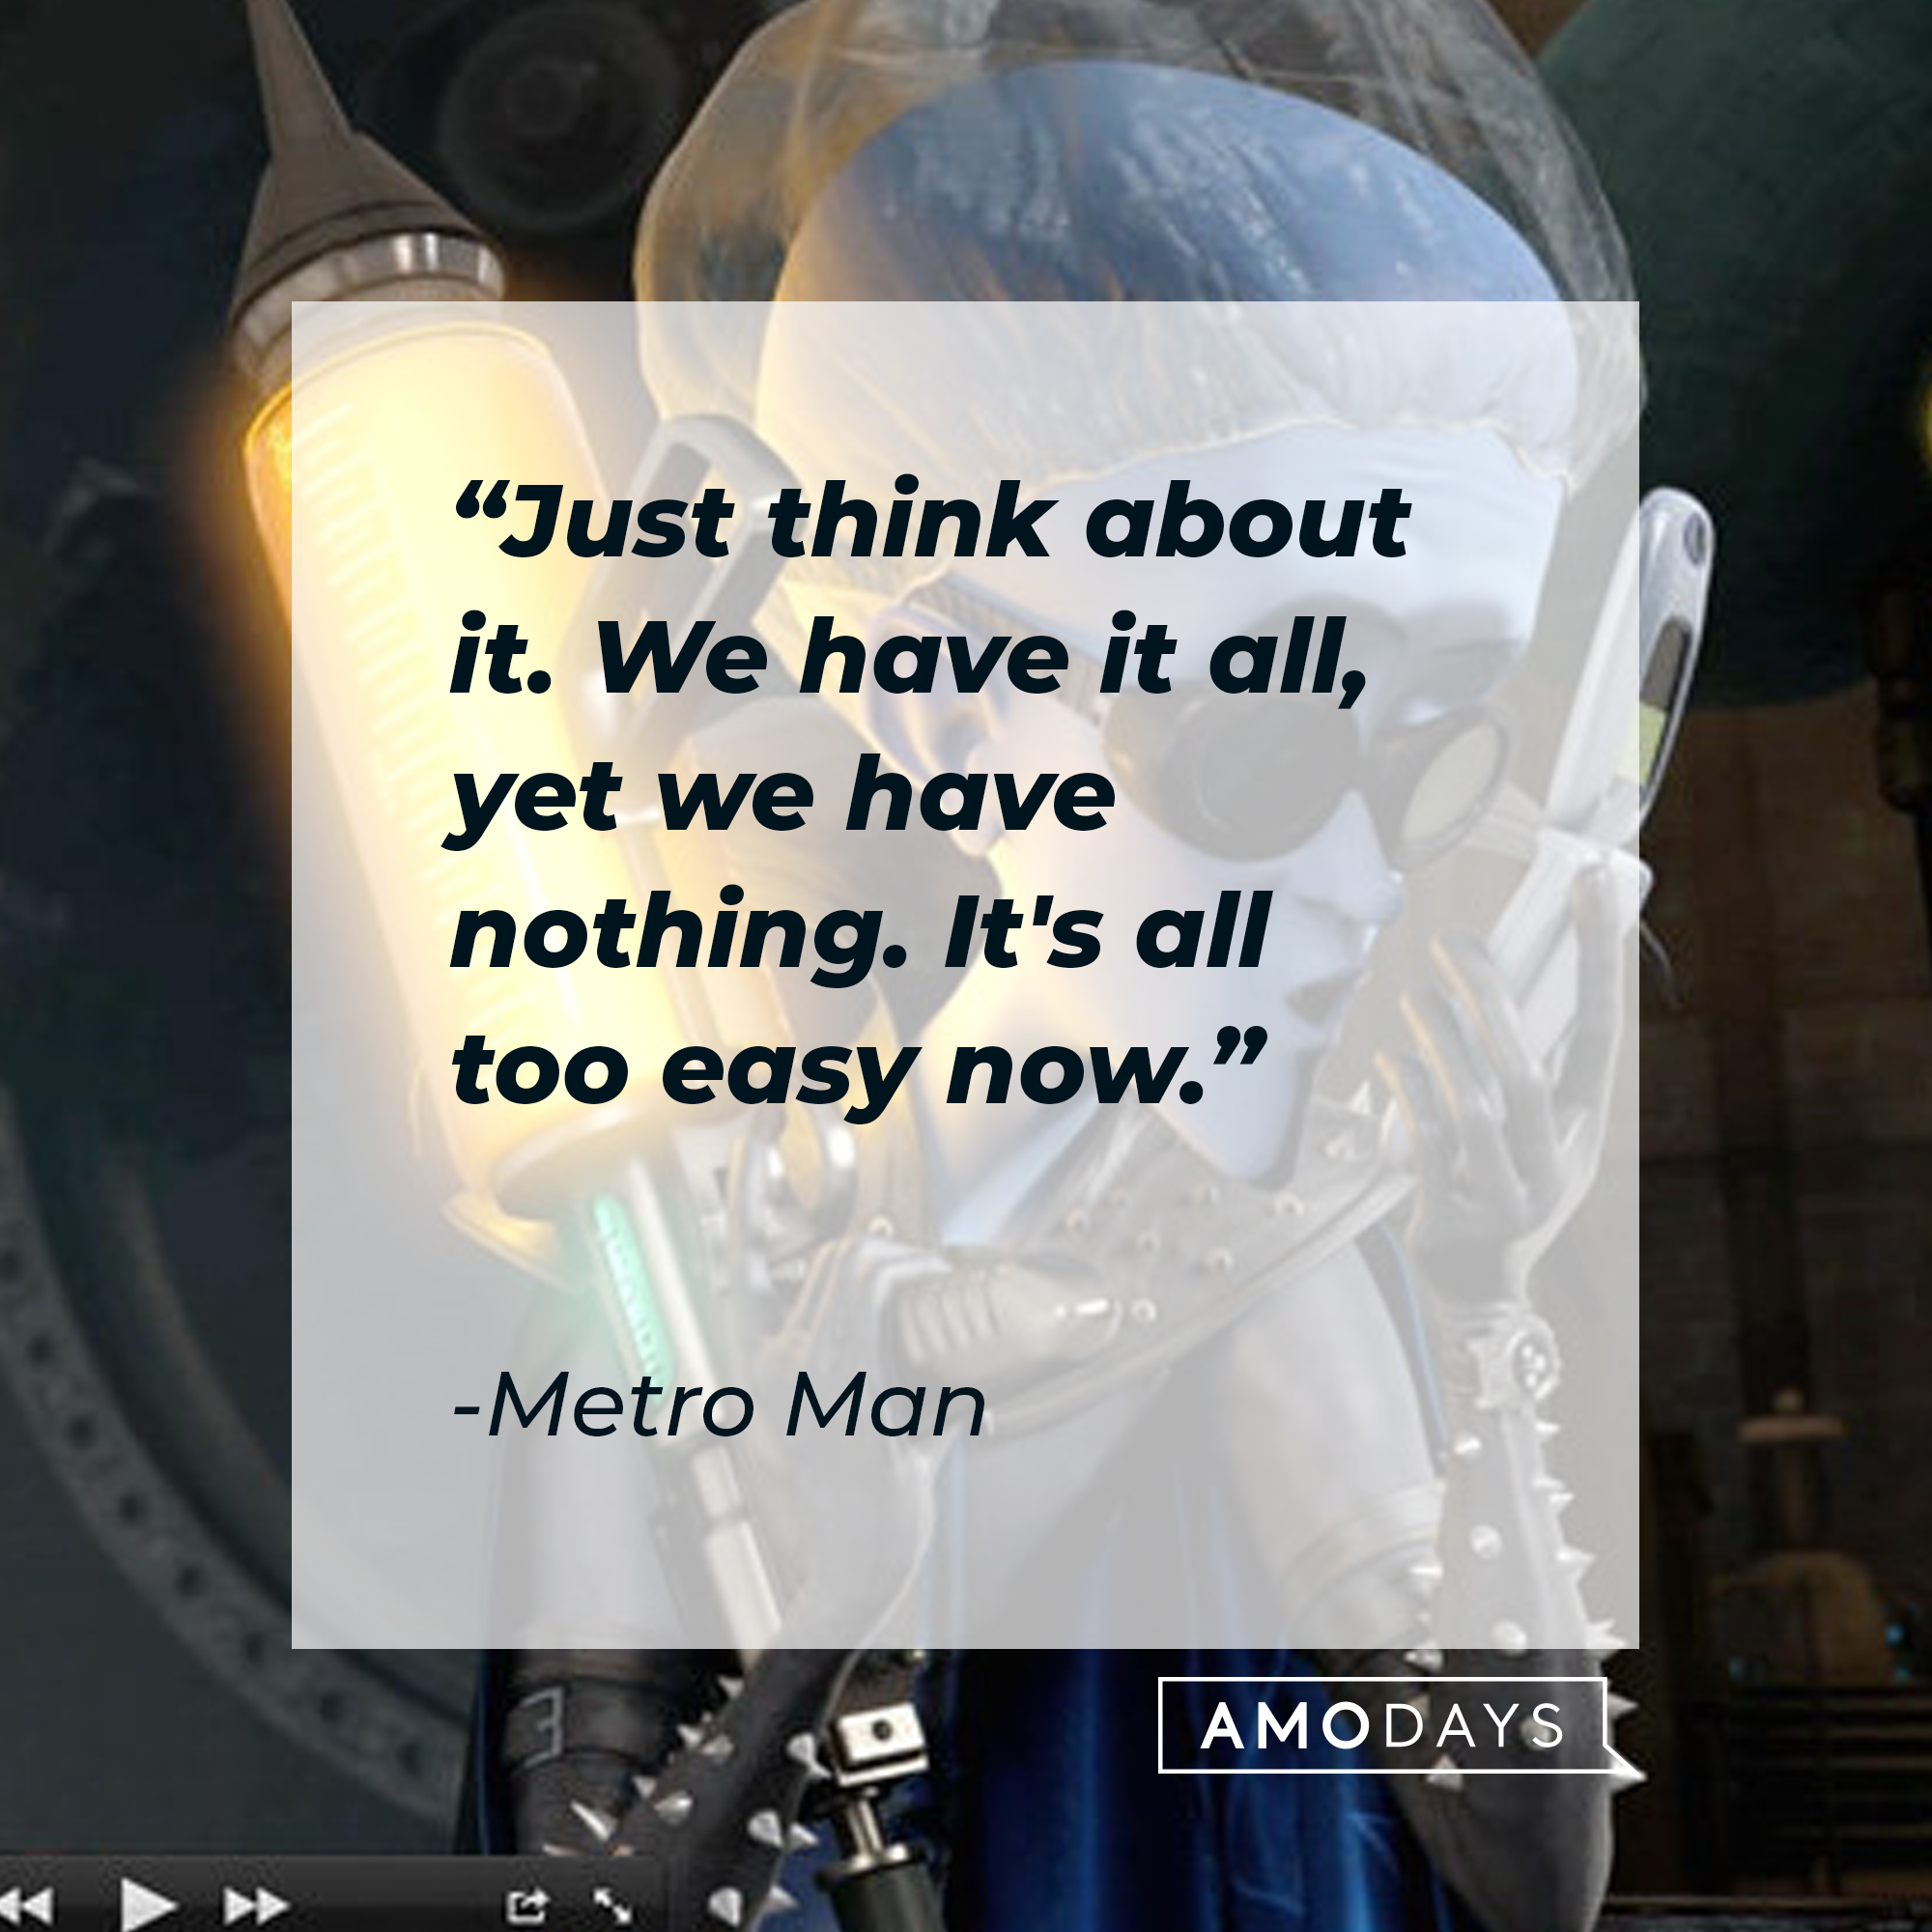 Metro Man's quote: "Just think about it. We have it all, yet we have nothing. It's all too easy now." | Source: Facebook.com/MegamindUK